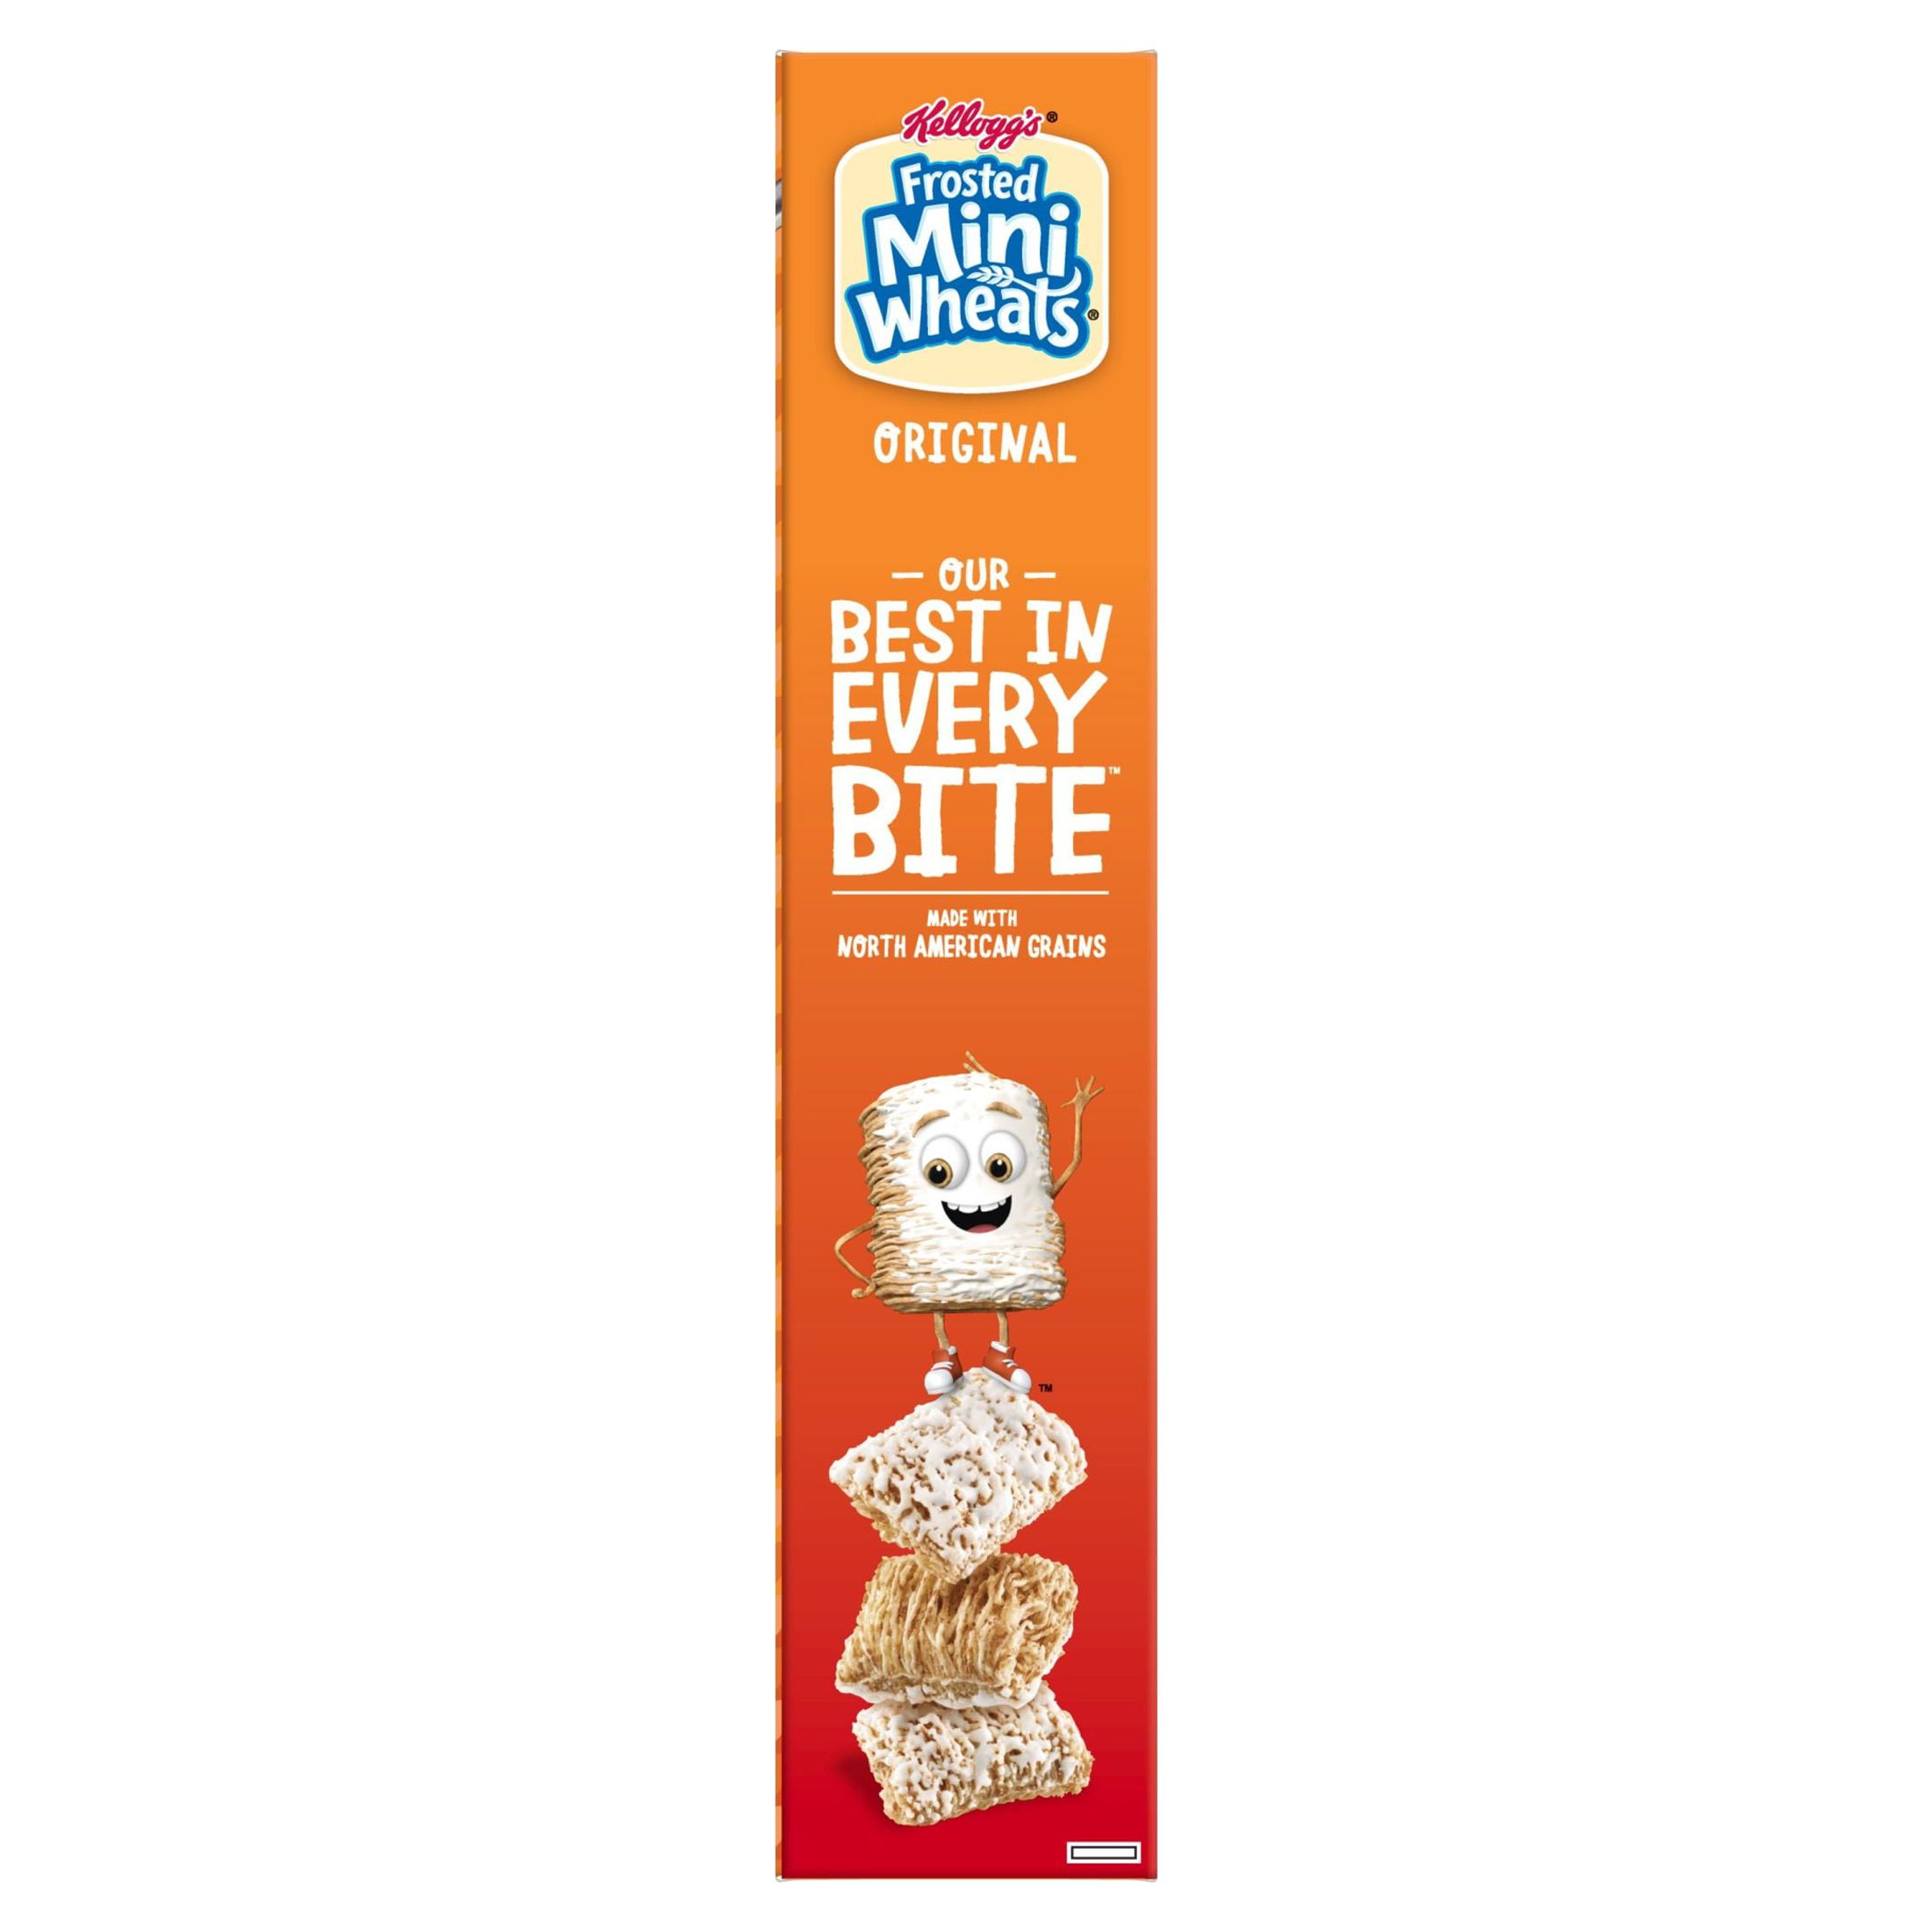 Kellogg's Frosted Mini-Wheats Original Cold Breakfast Cereal, 18 oz - image 8 of 11